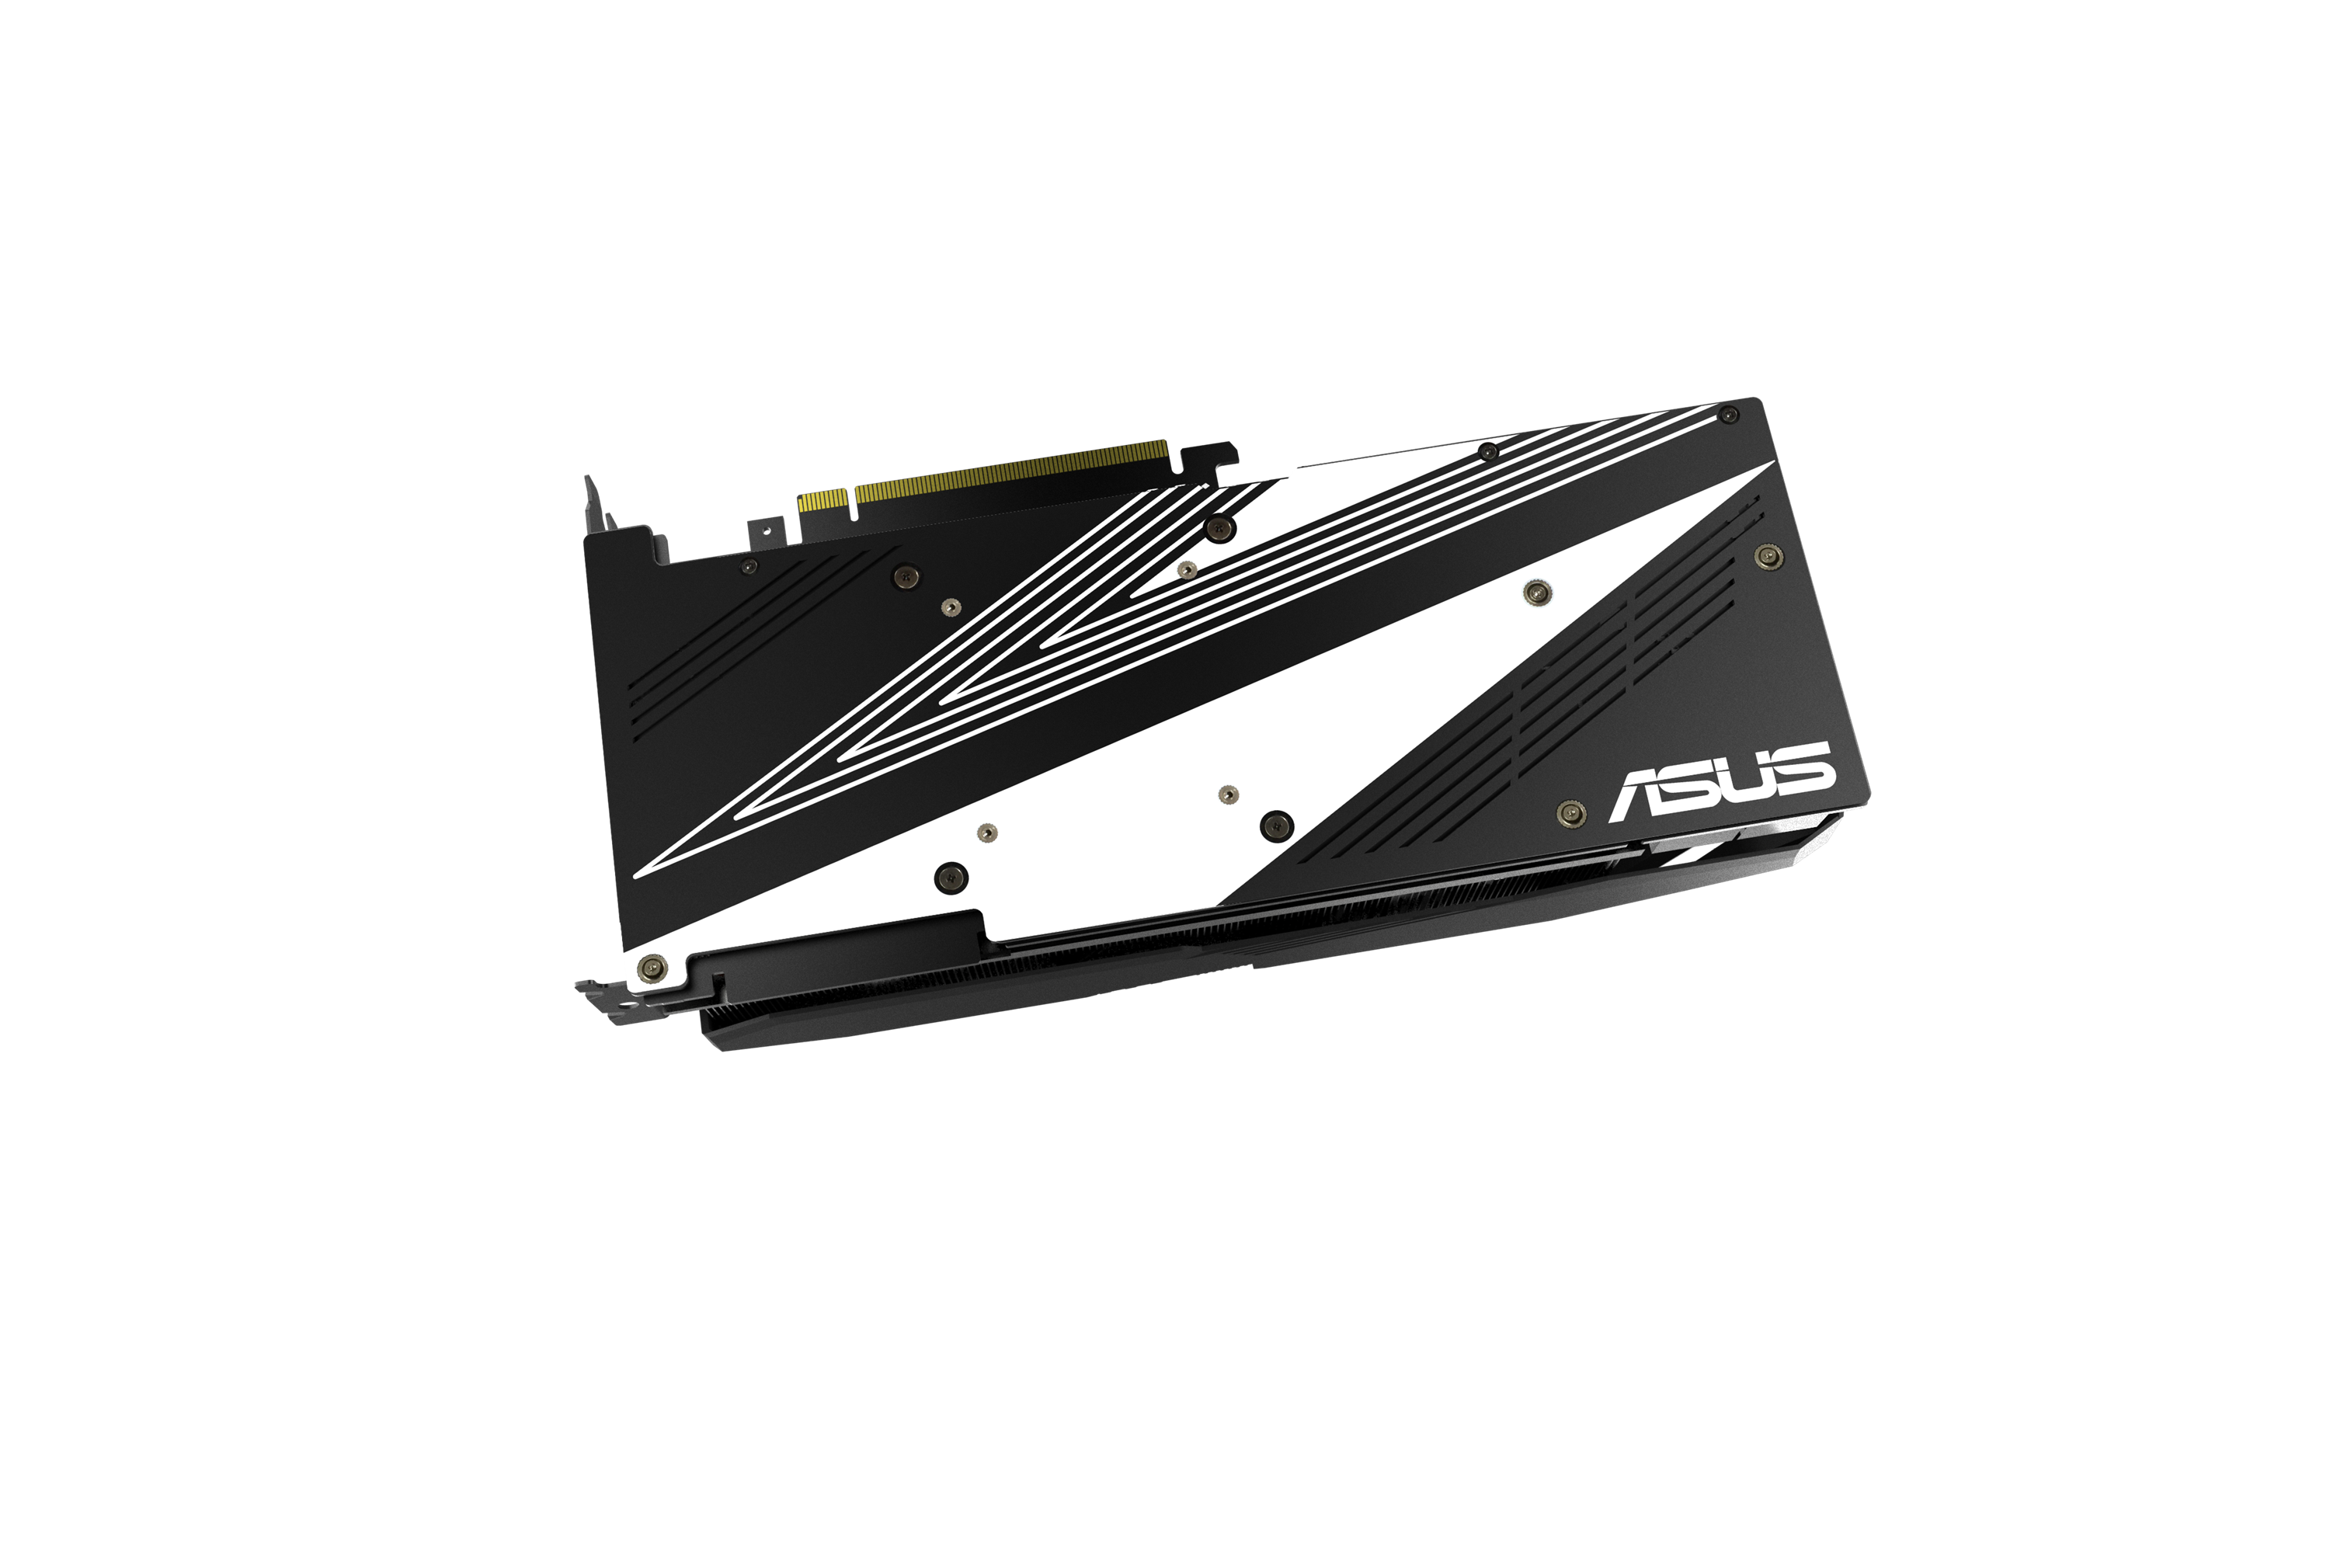 ASUS GeForce RTX 2080 Advanced Overclocked 8G GDDR6 Dual-Fan Edition VR Ready HDMI DP USB Type-C Card (DUAL-RTX2080-A8G) GPUs / Video Graphics Cards -